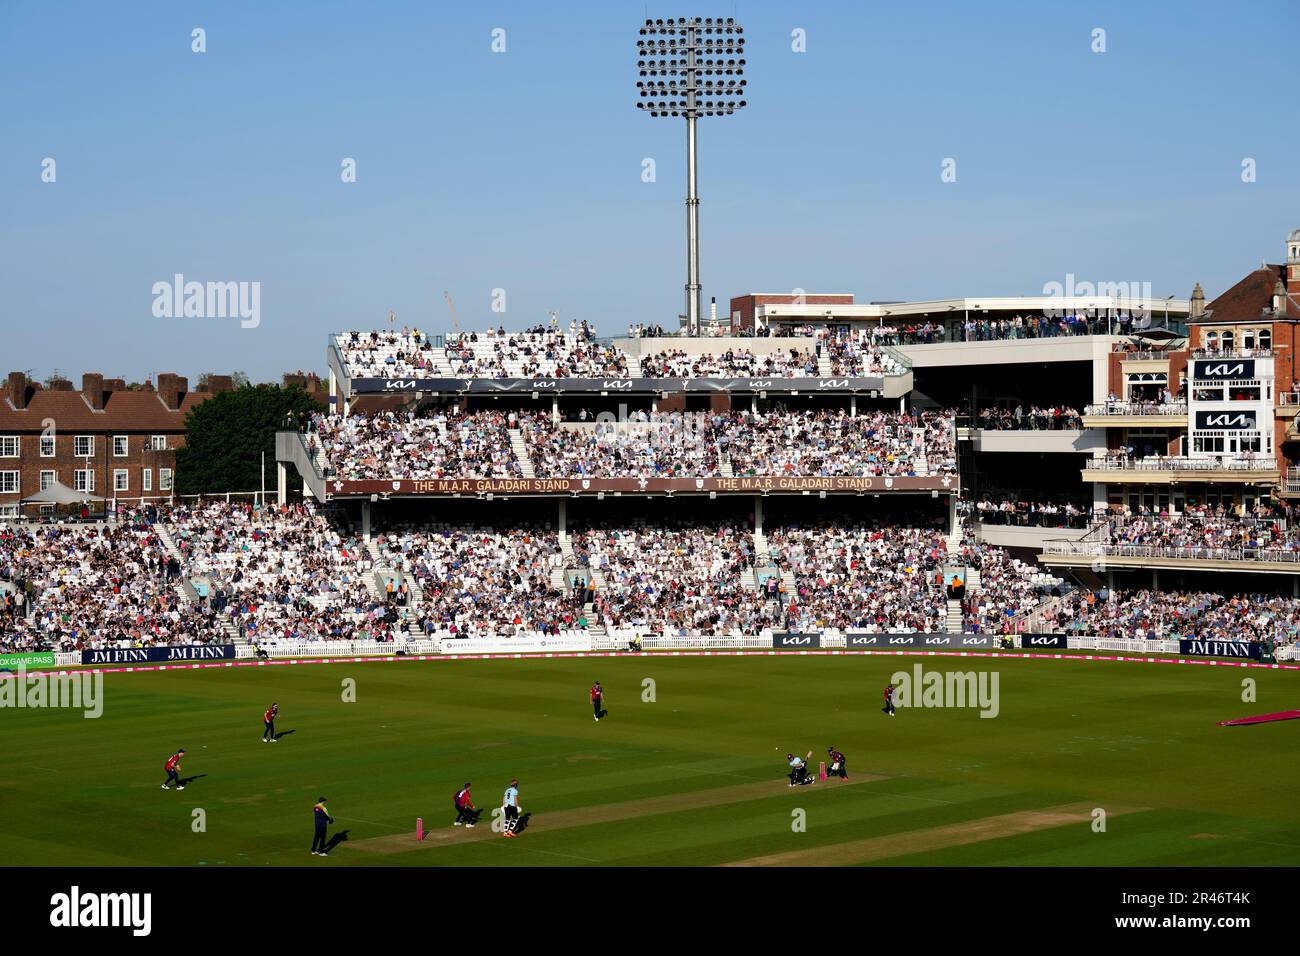 Surrey’s Will Jacks hits out on his way to a score of 17 during the Vitality Blast T20 match at the Kia Oval, London Picture date: Friday May 26, 2022. Stock Photo